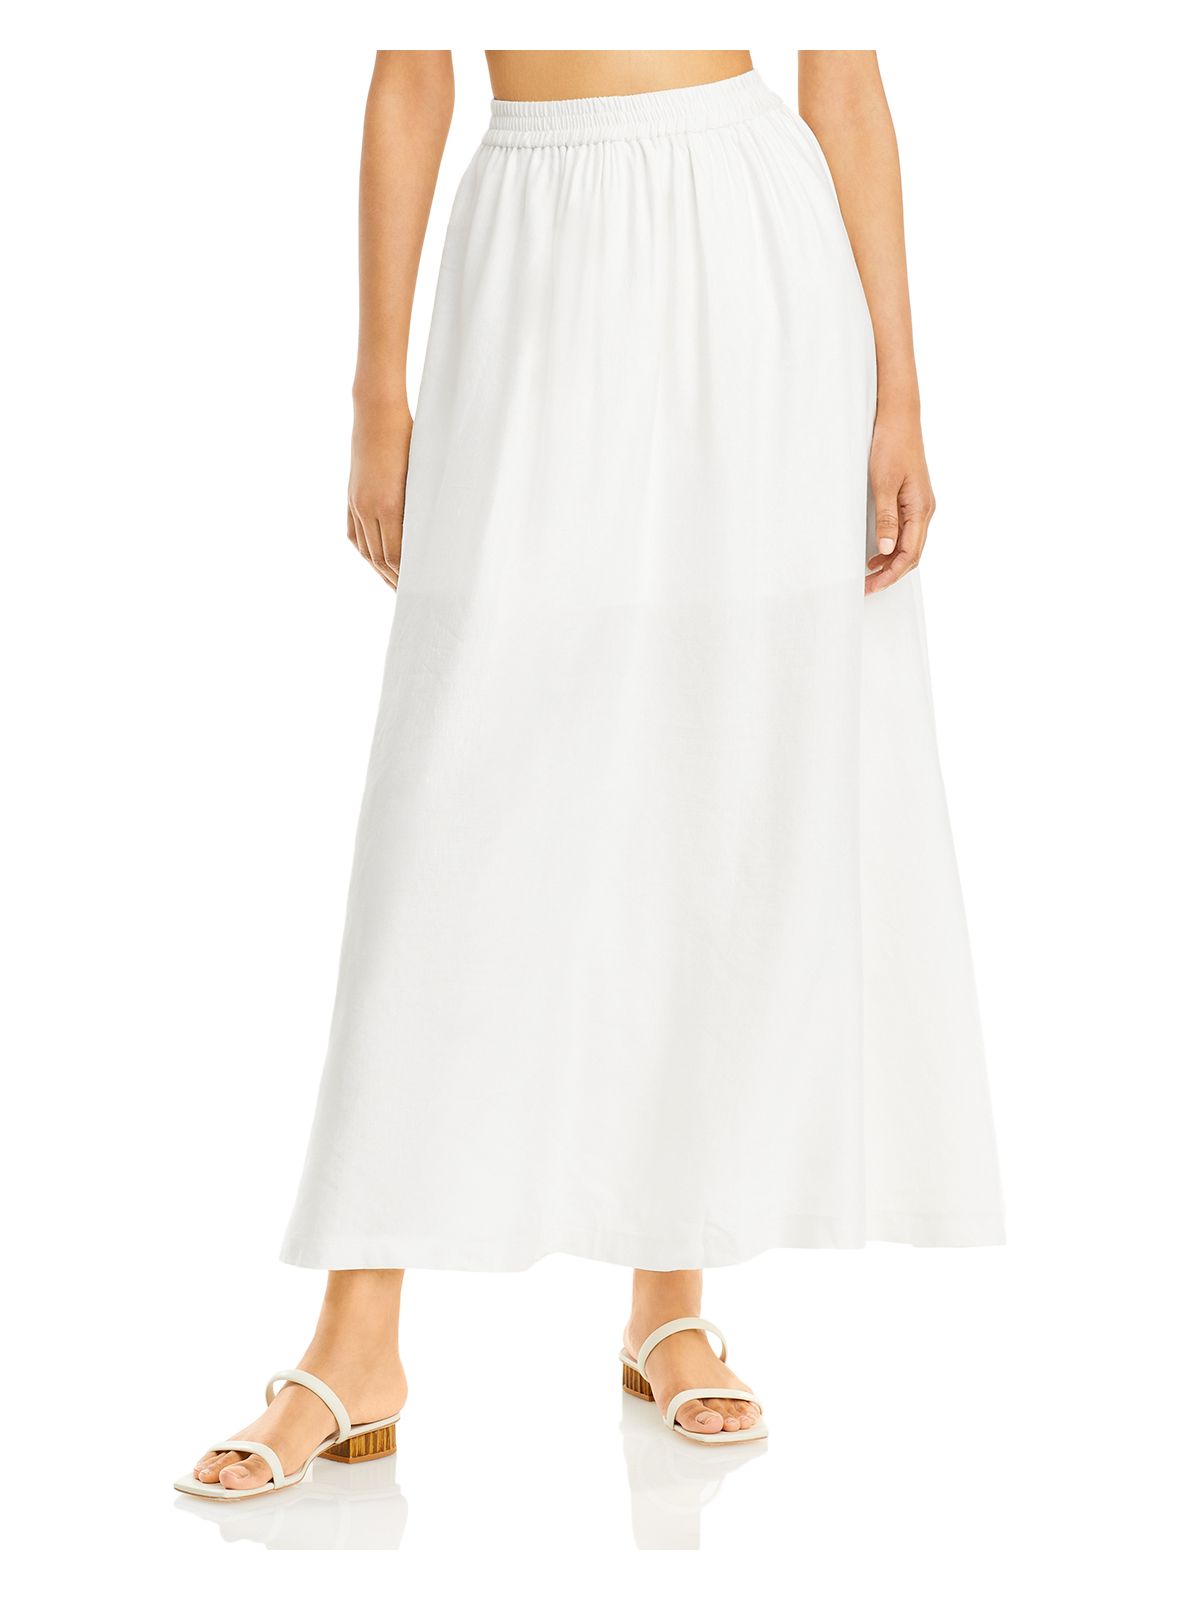 SIGNIFICANT OTHER Womens Ivory Maxi A-Line Skirt 10